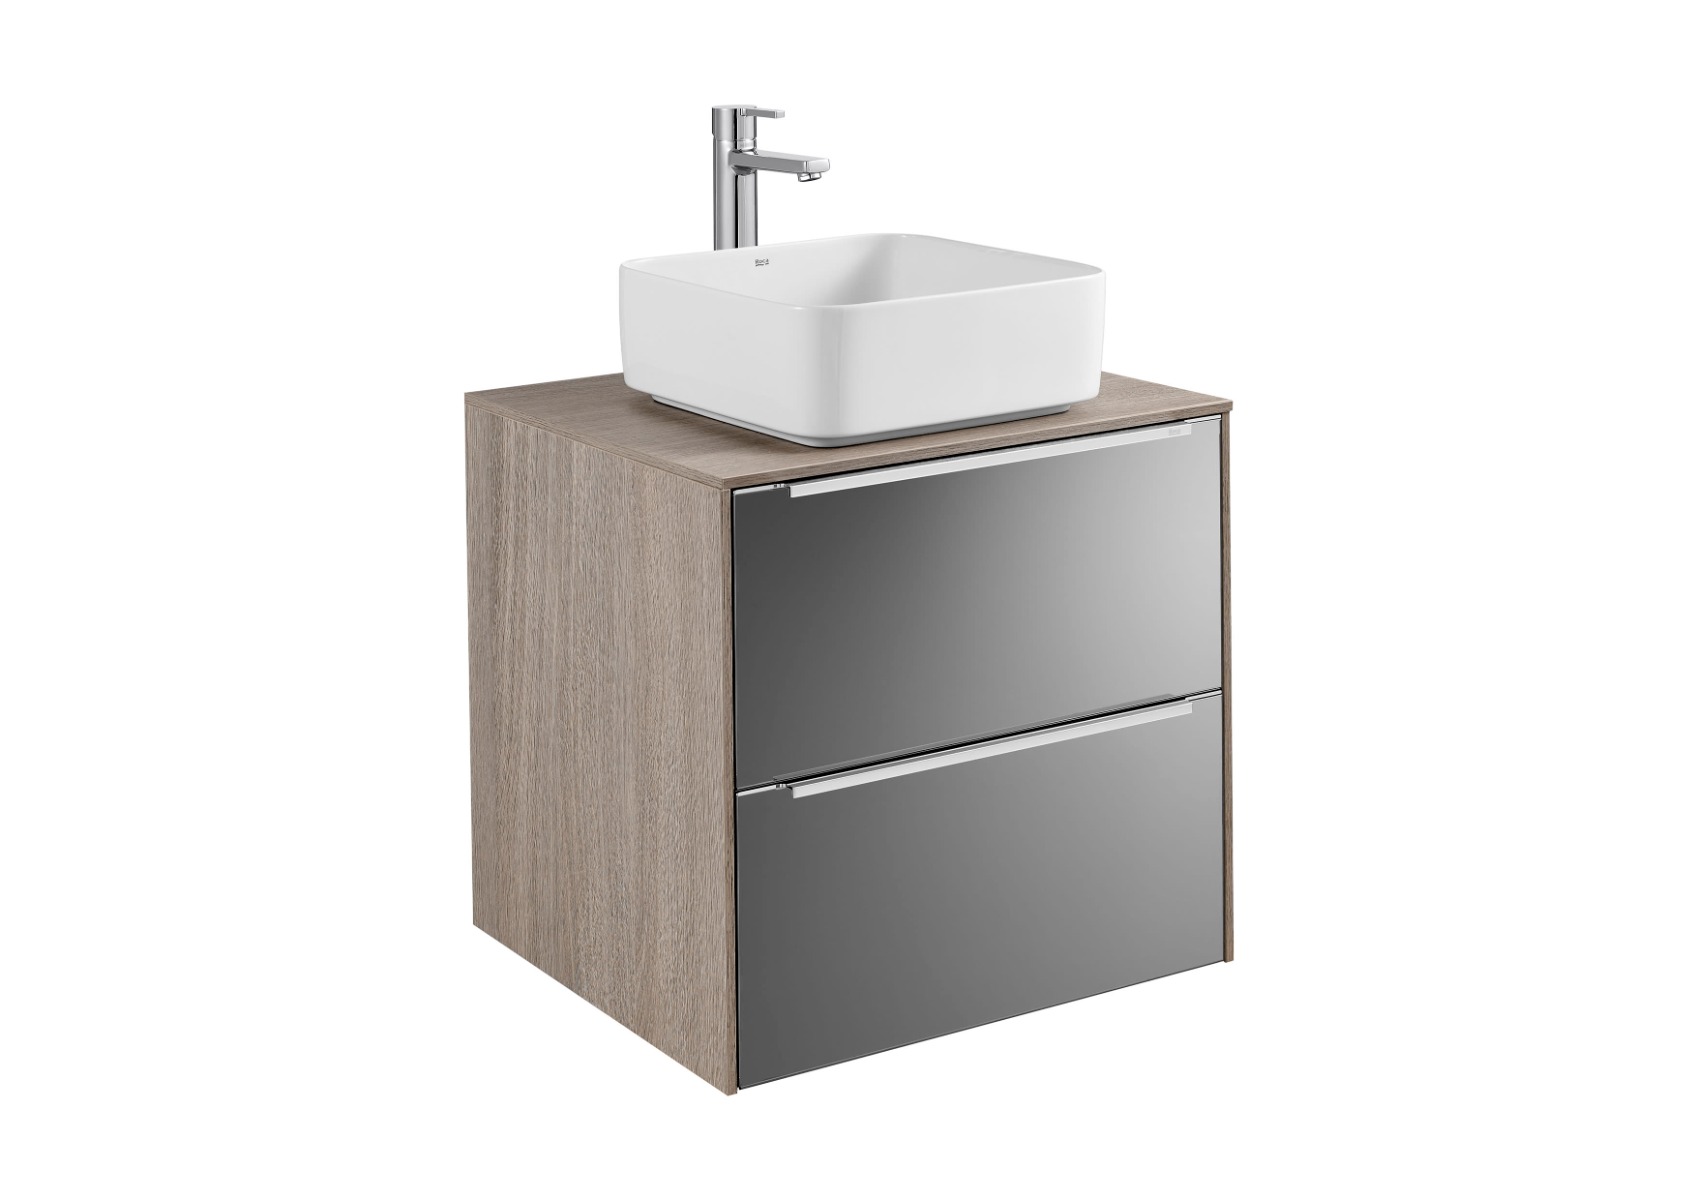 857000403 + 857010402 Base unit for over countertop basin